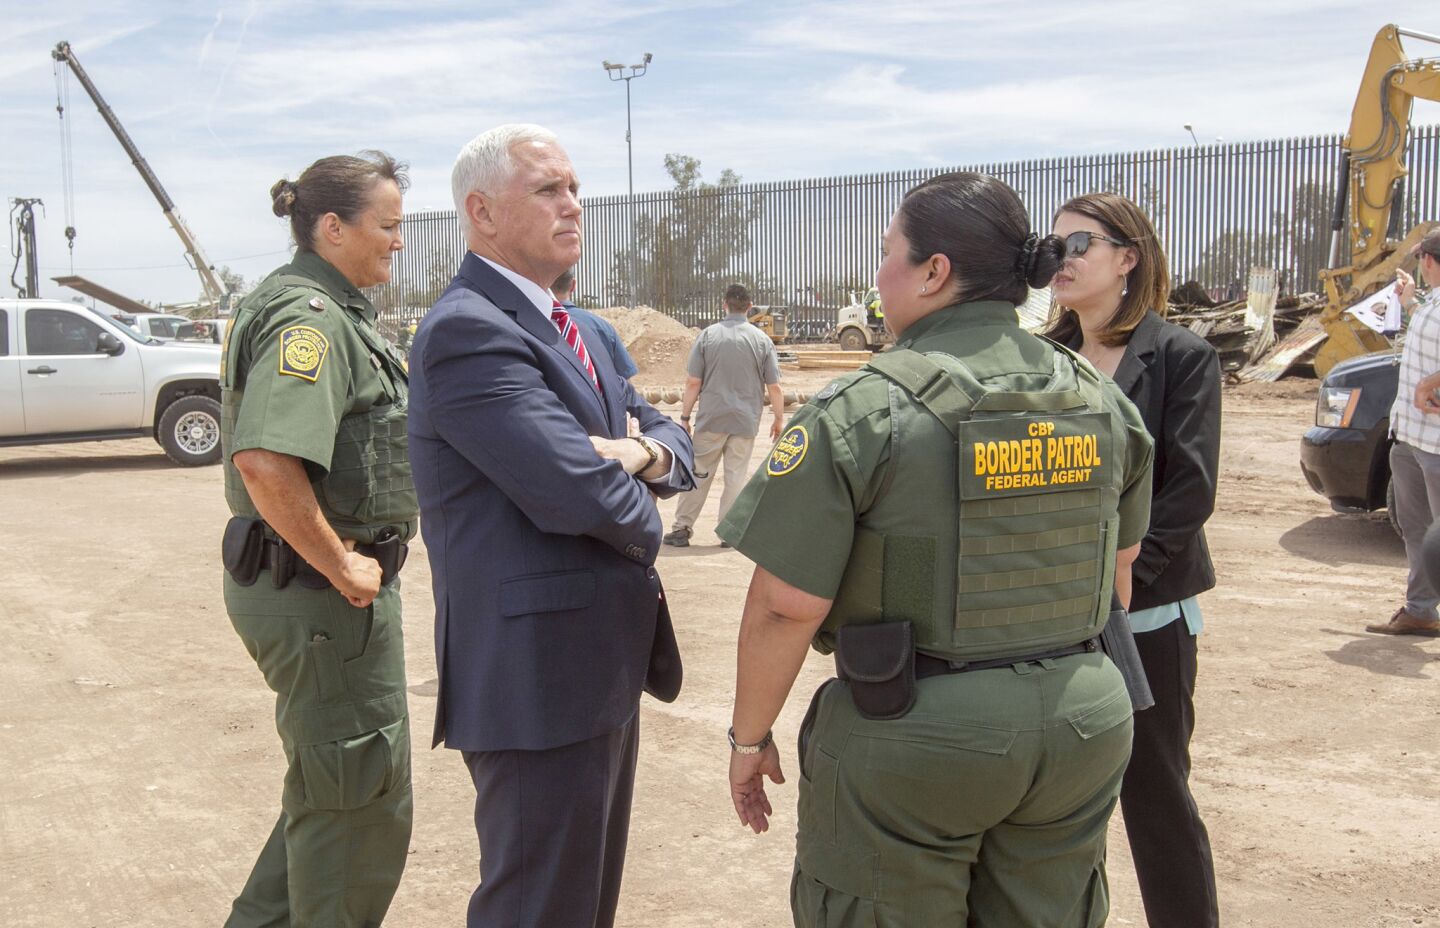 Vice President Mike Pence, center, meets with Border Patrol officials in Calexico on April 30.